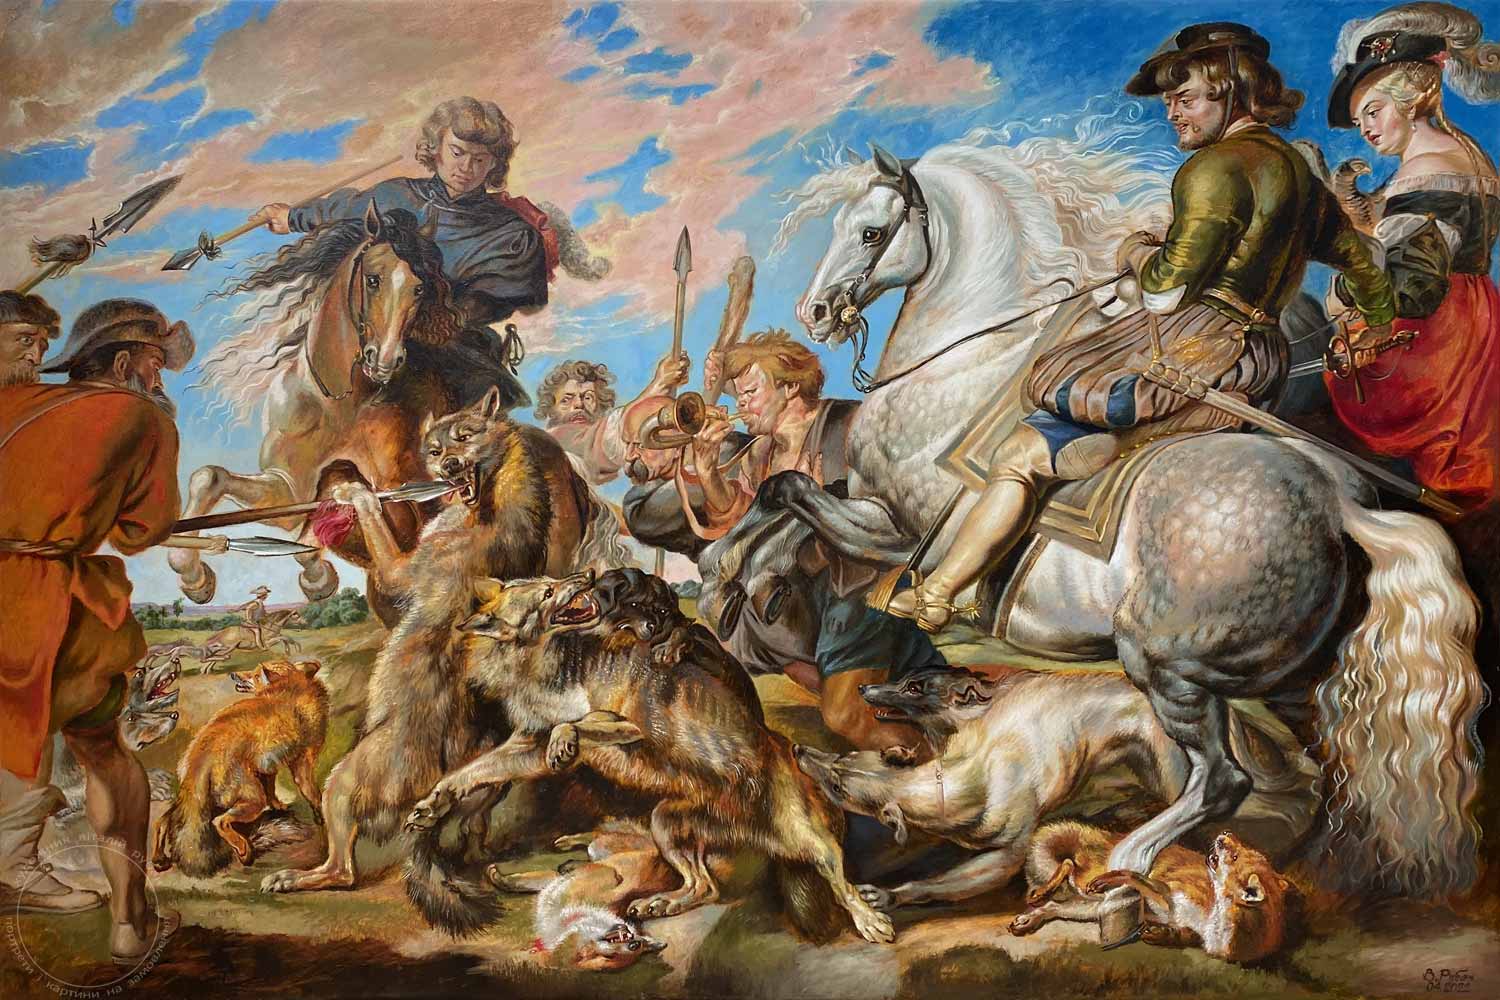 Copy of the painting The Wolf and Fox Hunt - painter Vitalii Ruban.